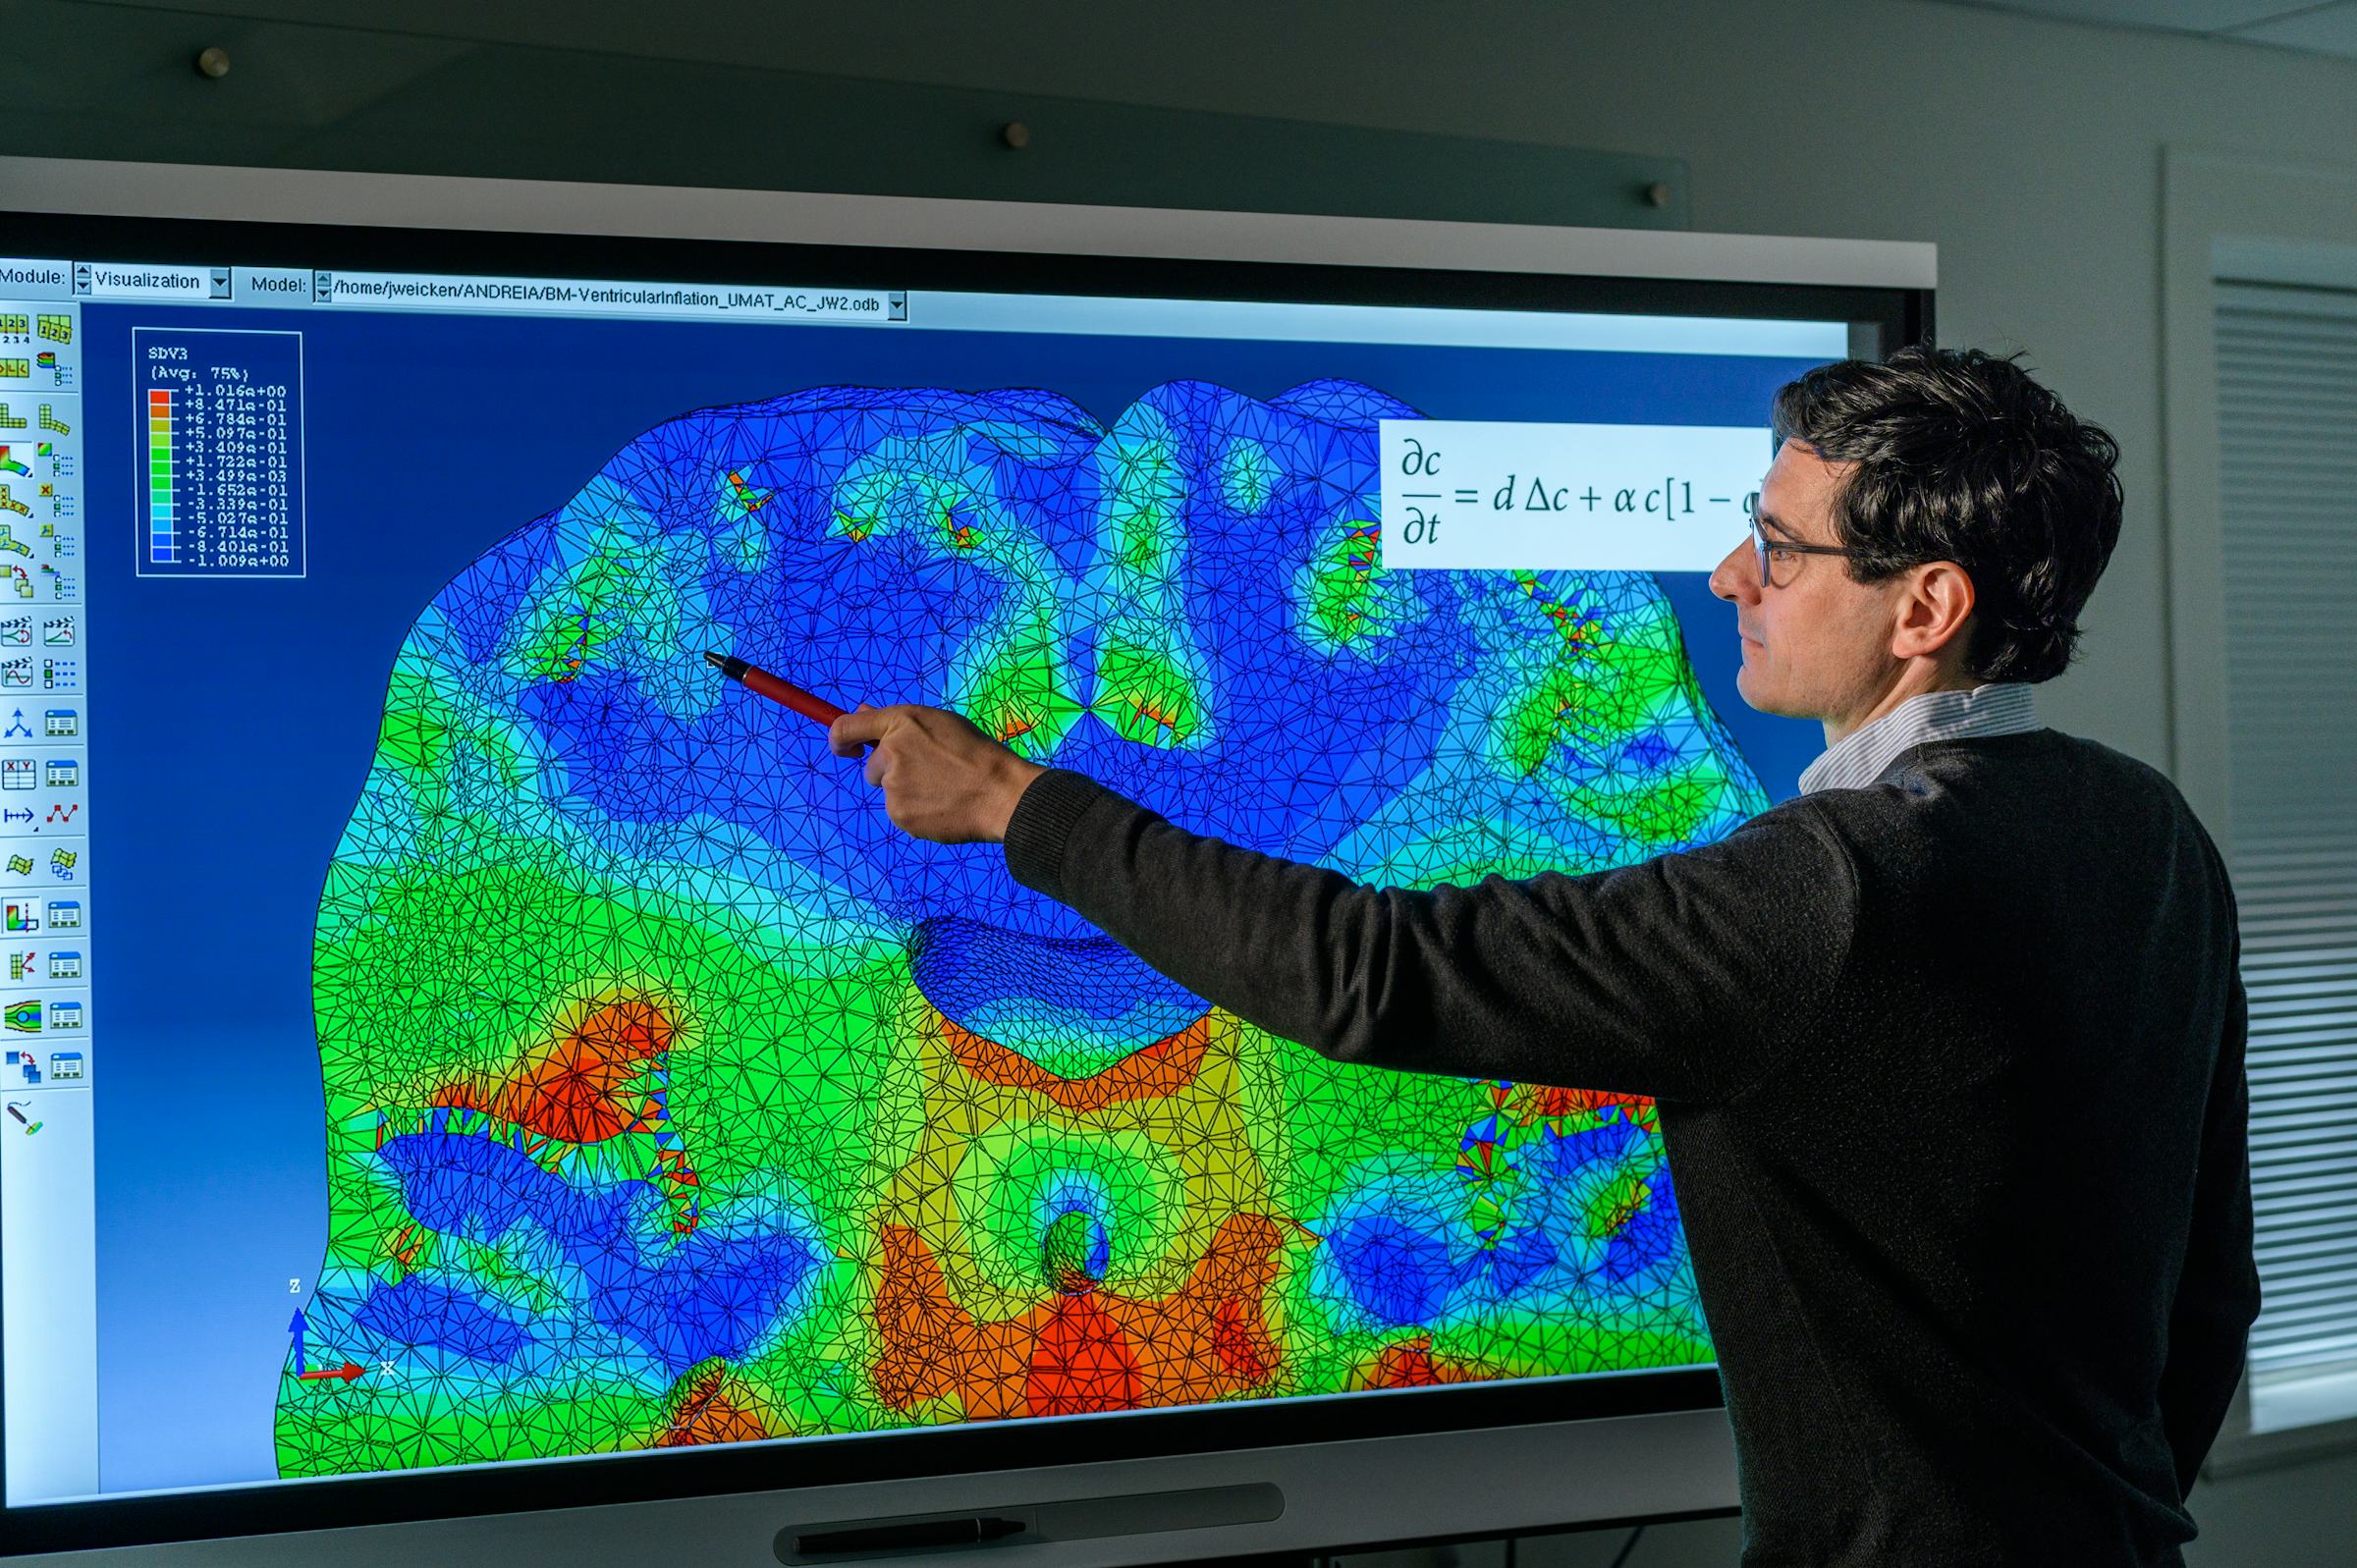 Stevens professor pointing to color image of a brain scan on large screen